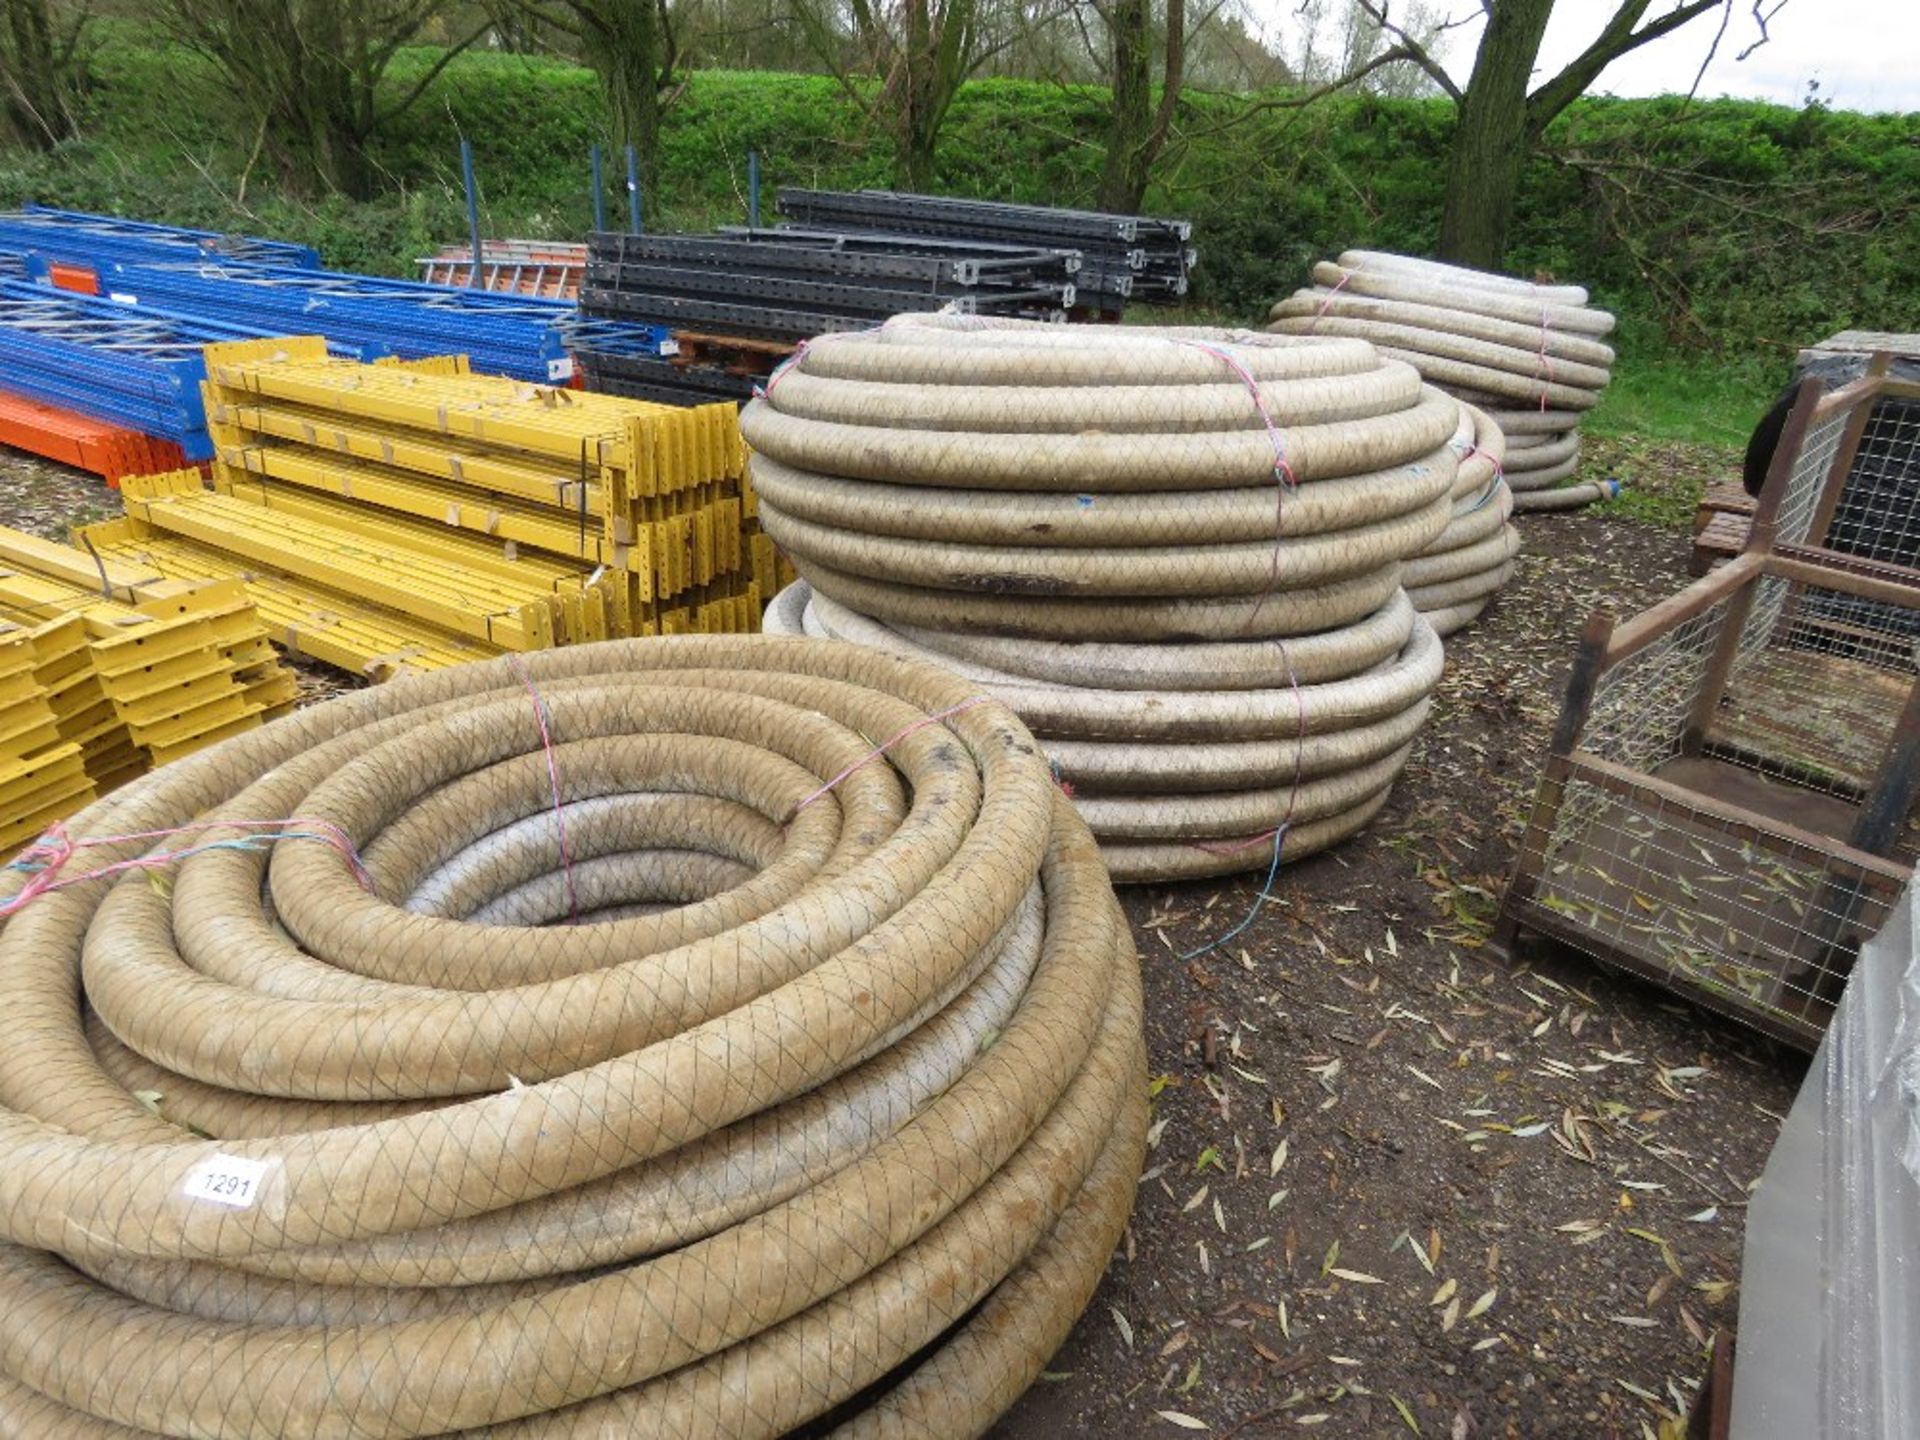 6 X ROLLS OF 4" LAND DRAIN WITH MEMBRANE COVERING.